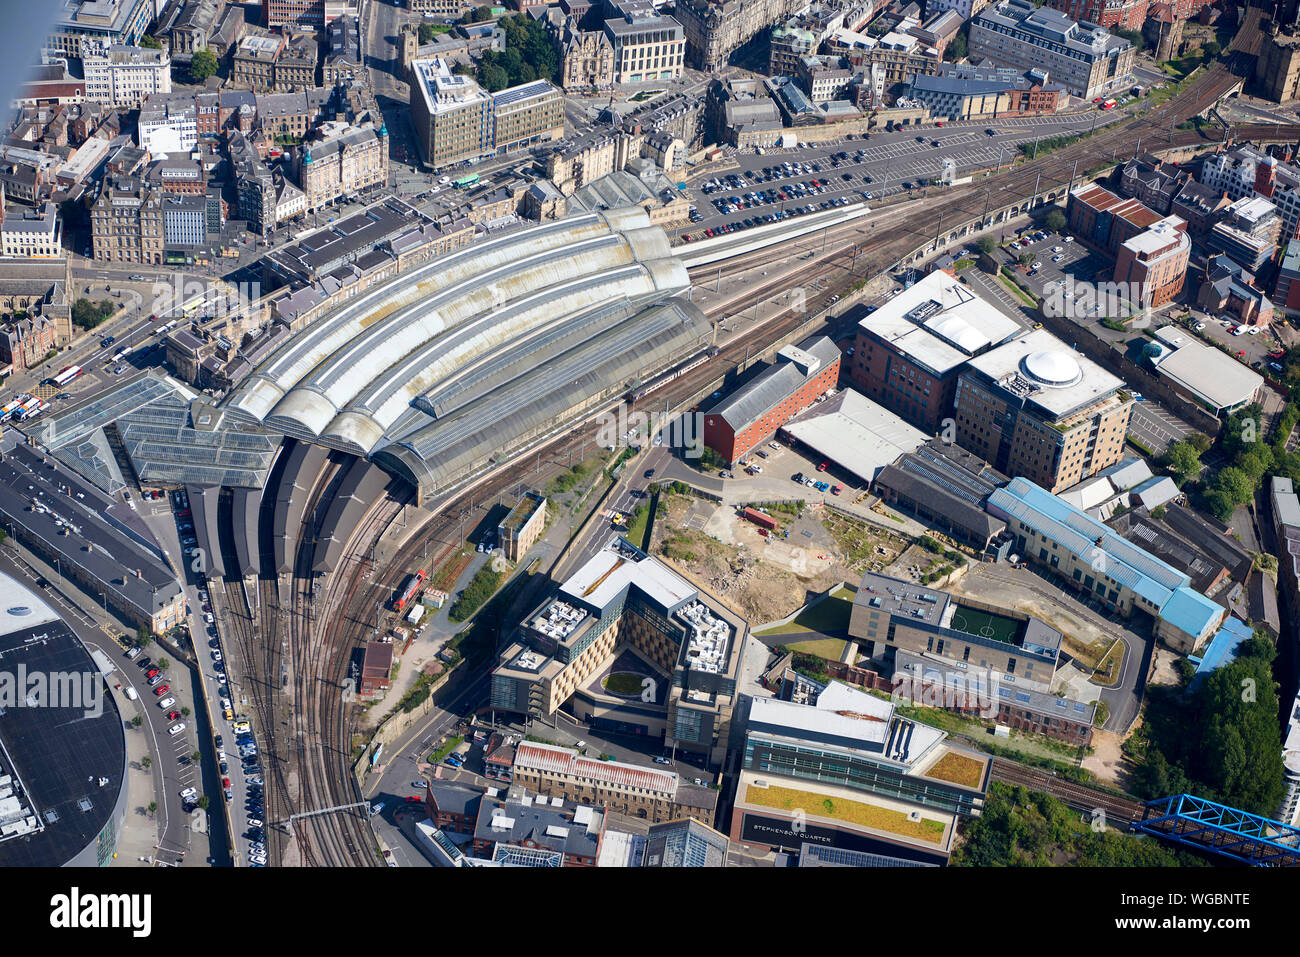 An aerial view of Newcastle upon Tyne, city centre, North East  England, UK featuring the historic railway station Stock Photo